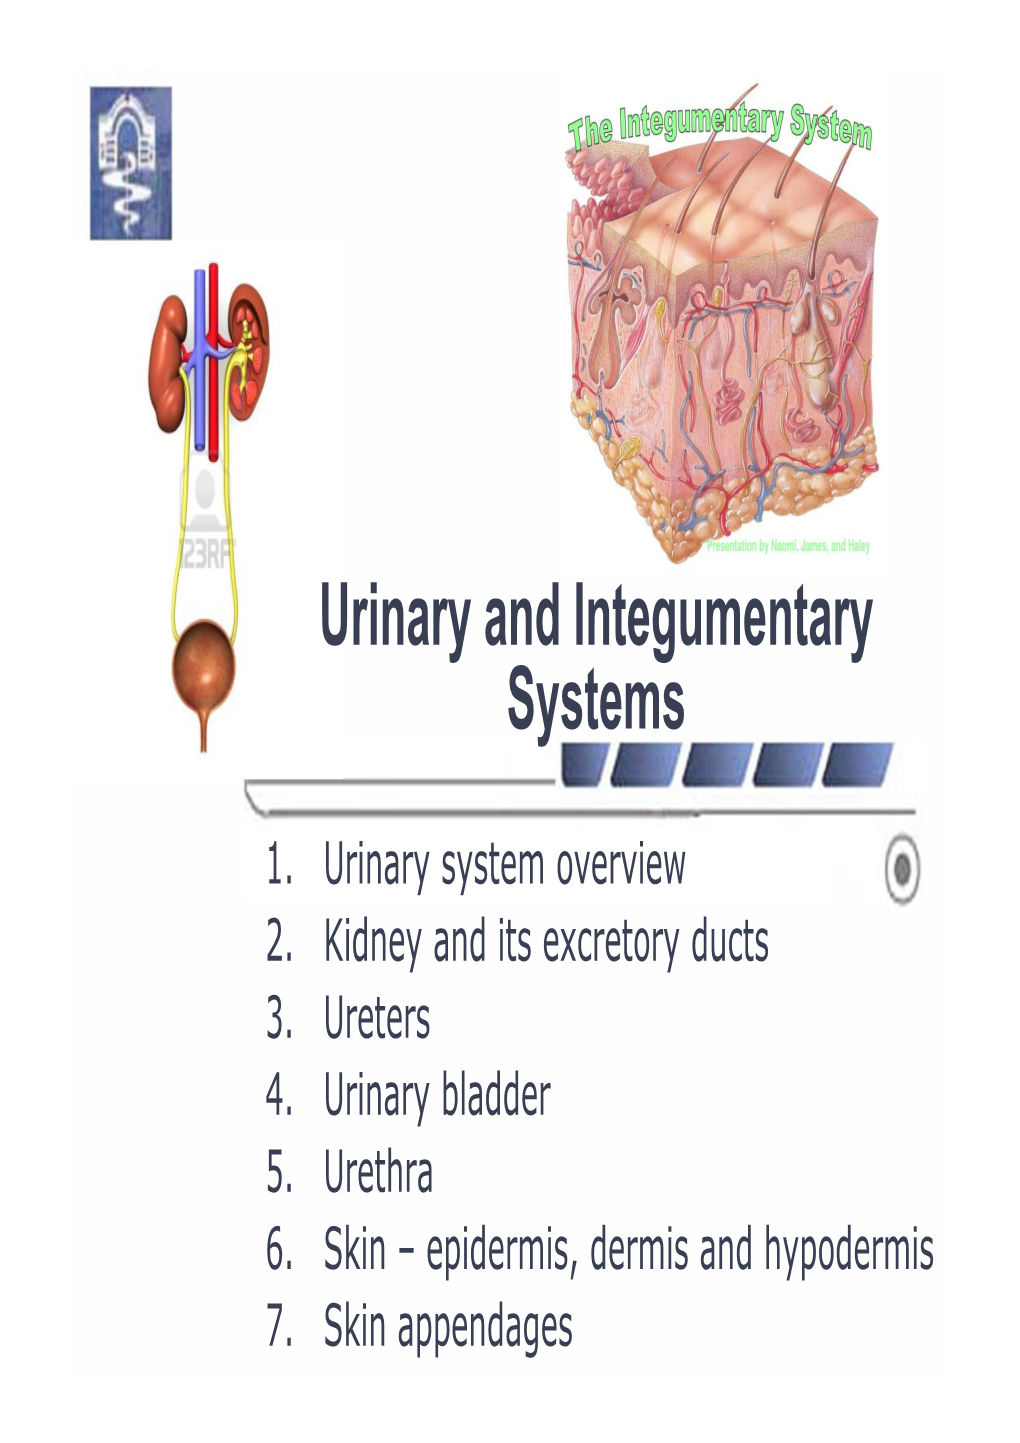 Urinary and Integumentary Systems